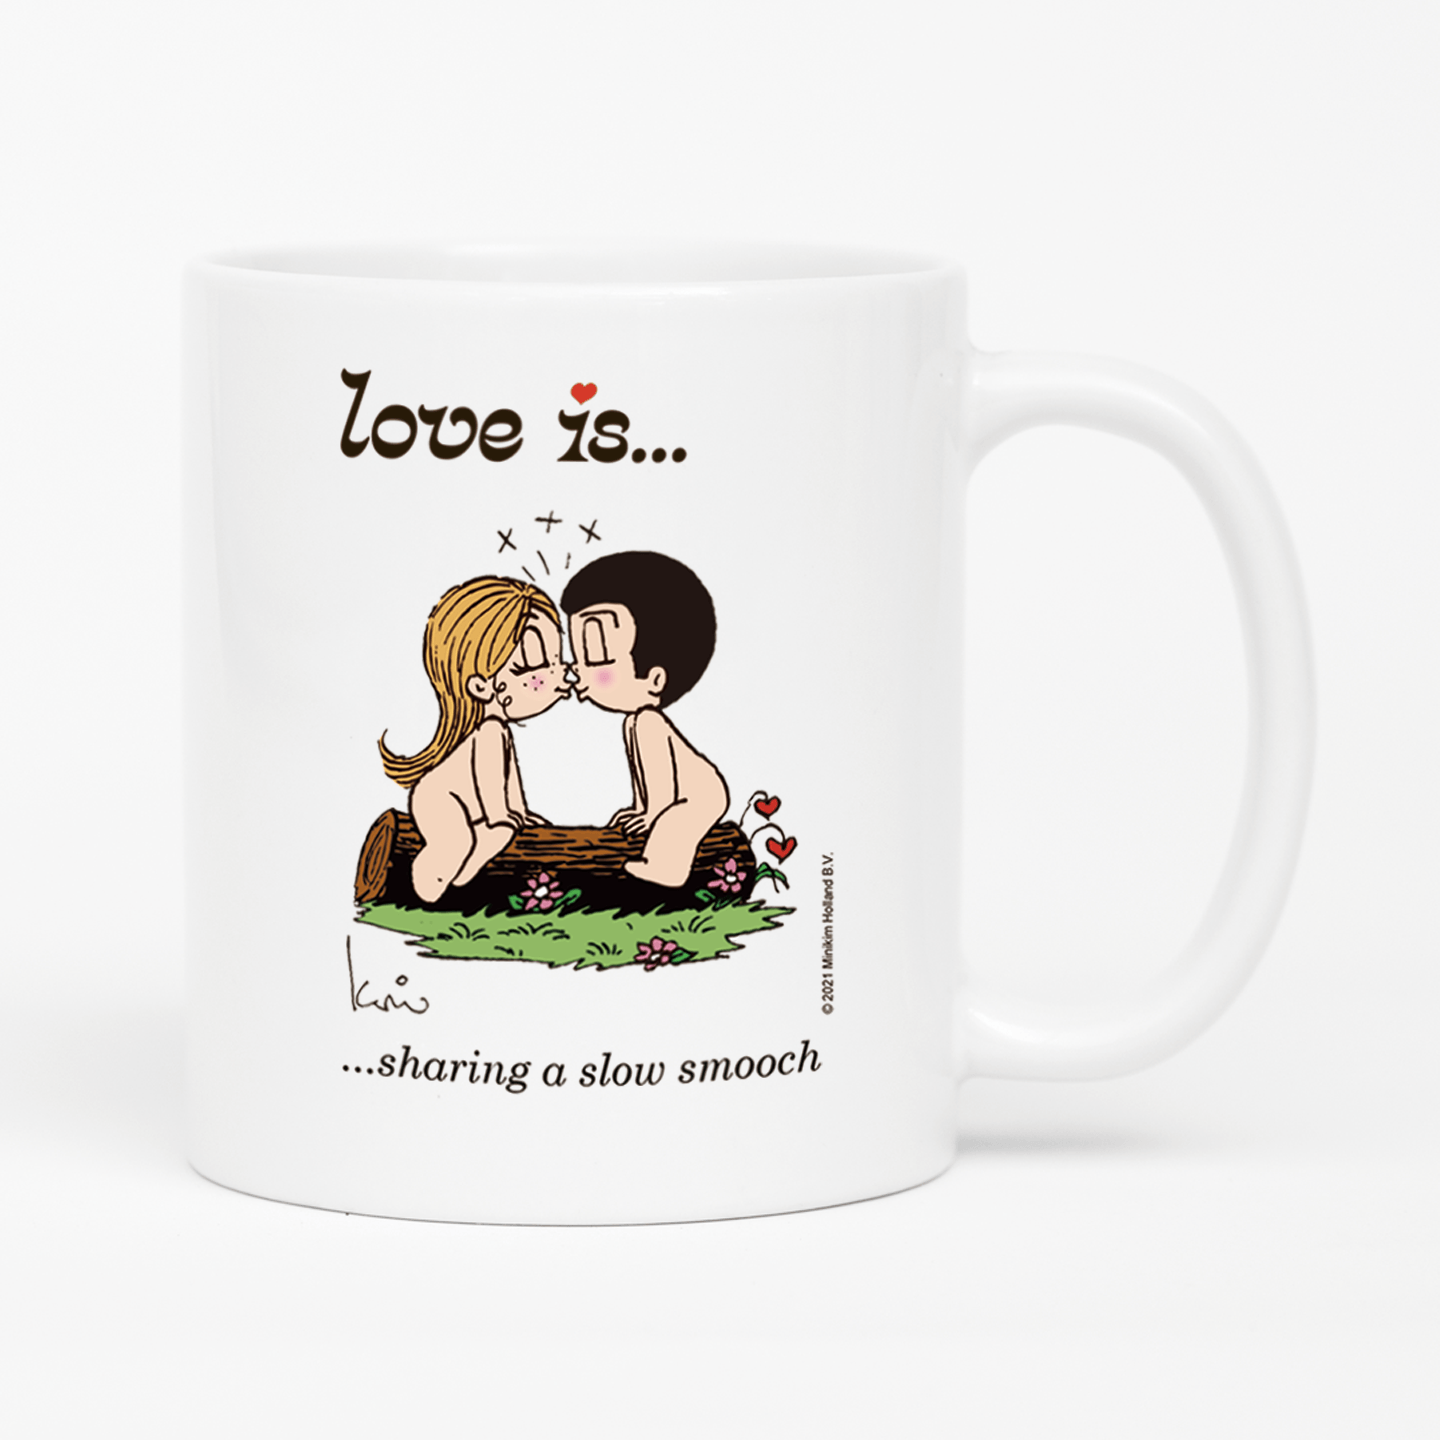 Front view: Love is... sharing a slow smooch  personalized ceramic mug by Kim Casali. 